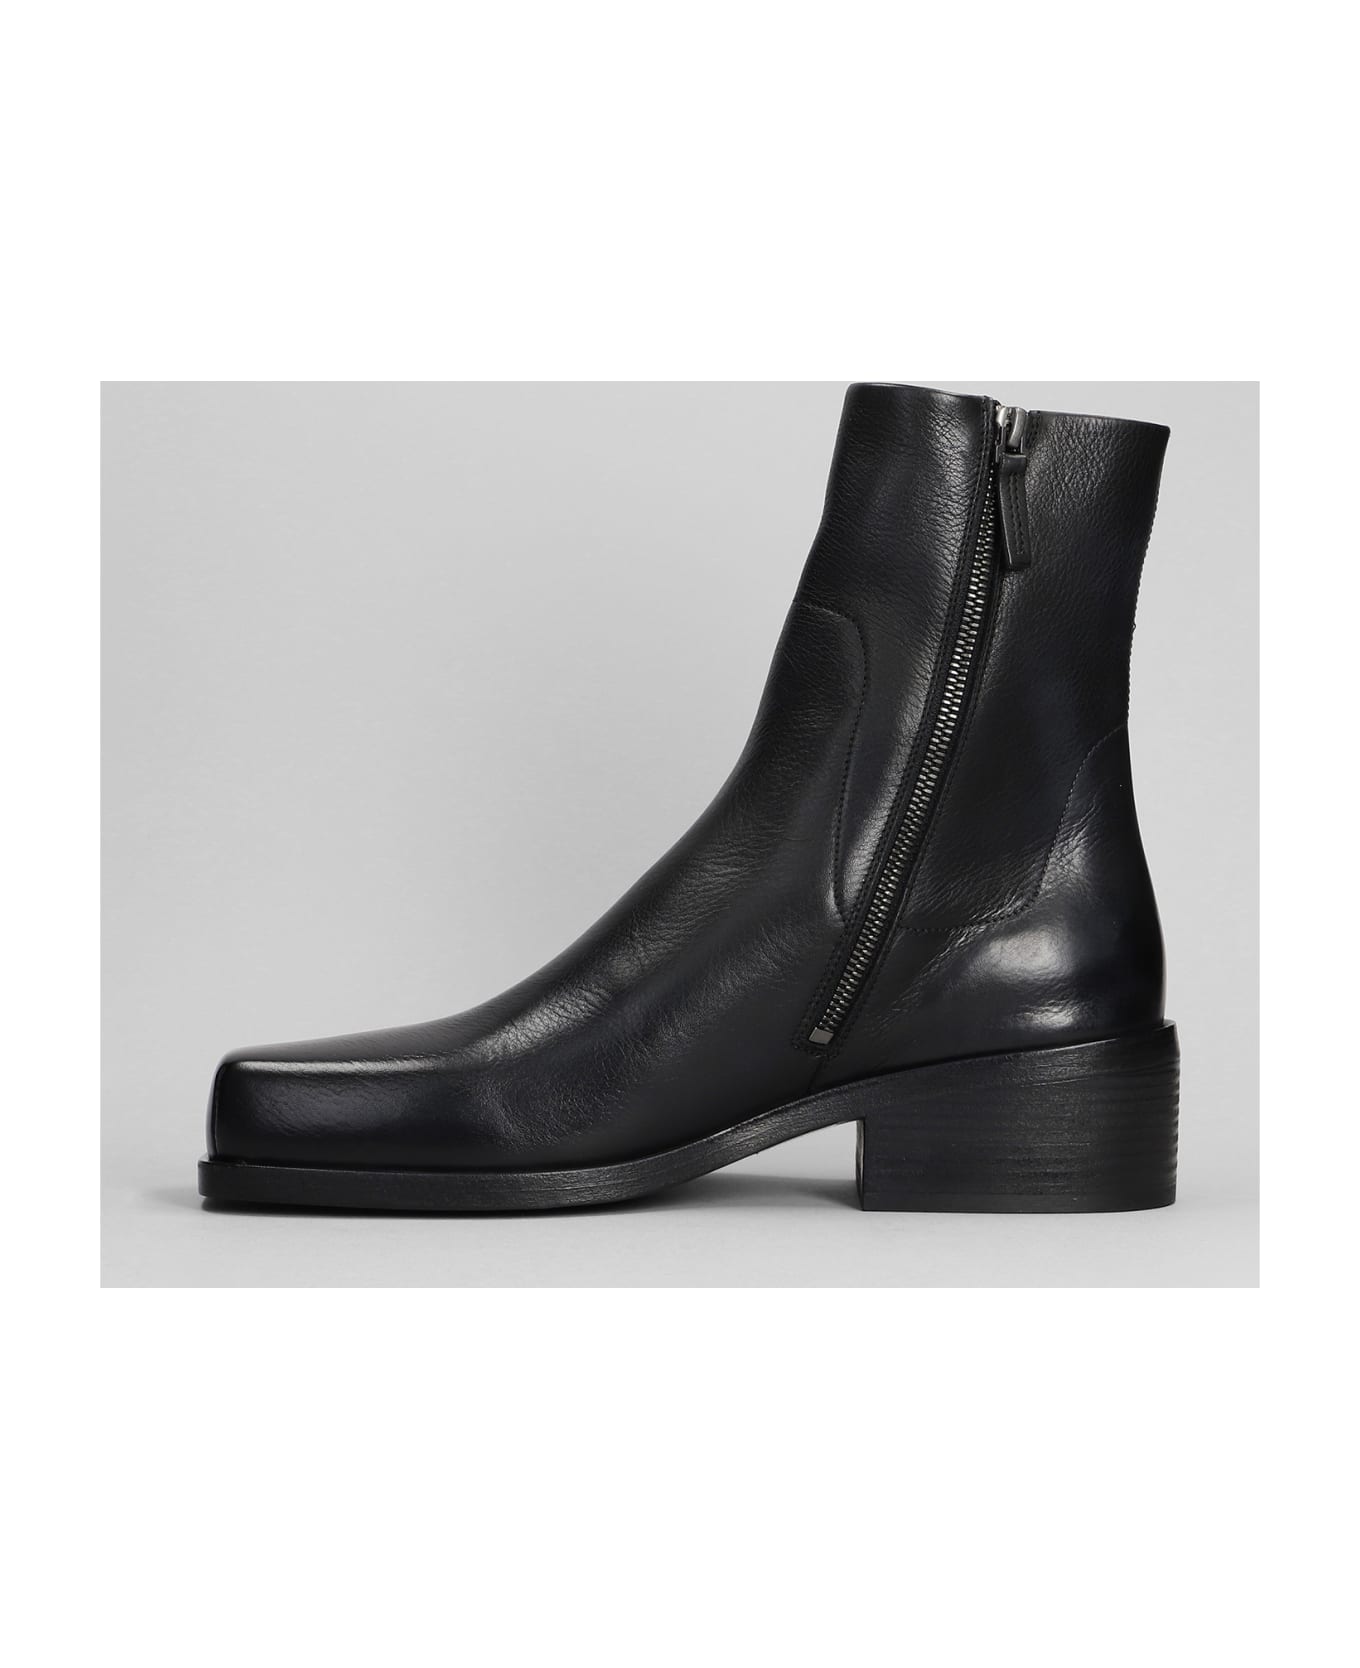 Marsell High Heels Ankle Boots In Black Leather - black